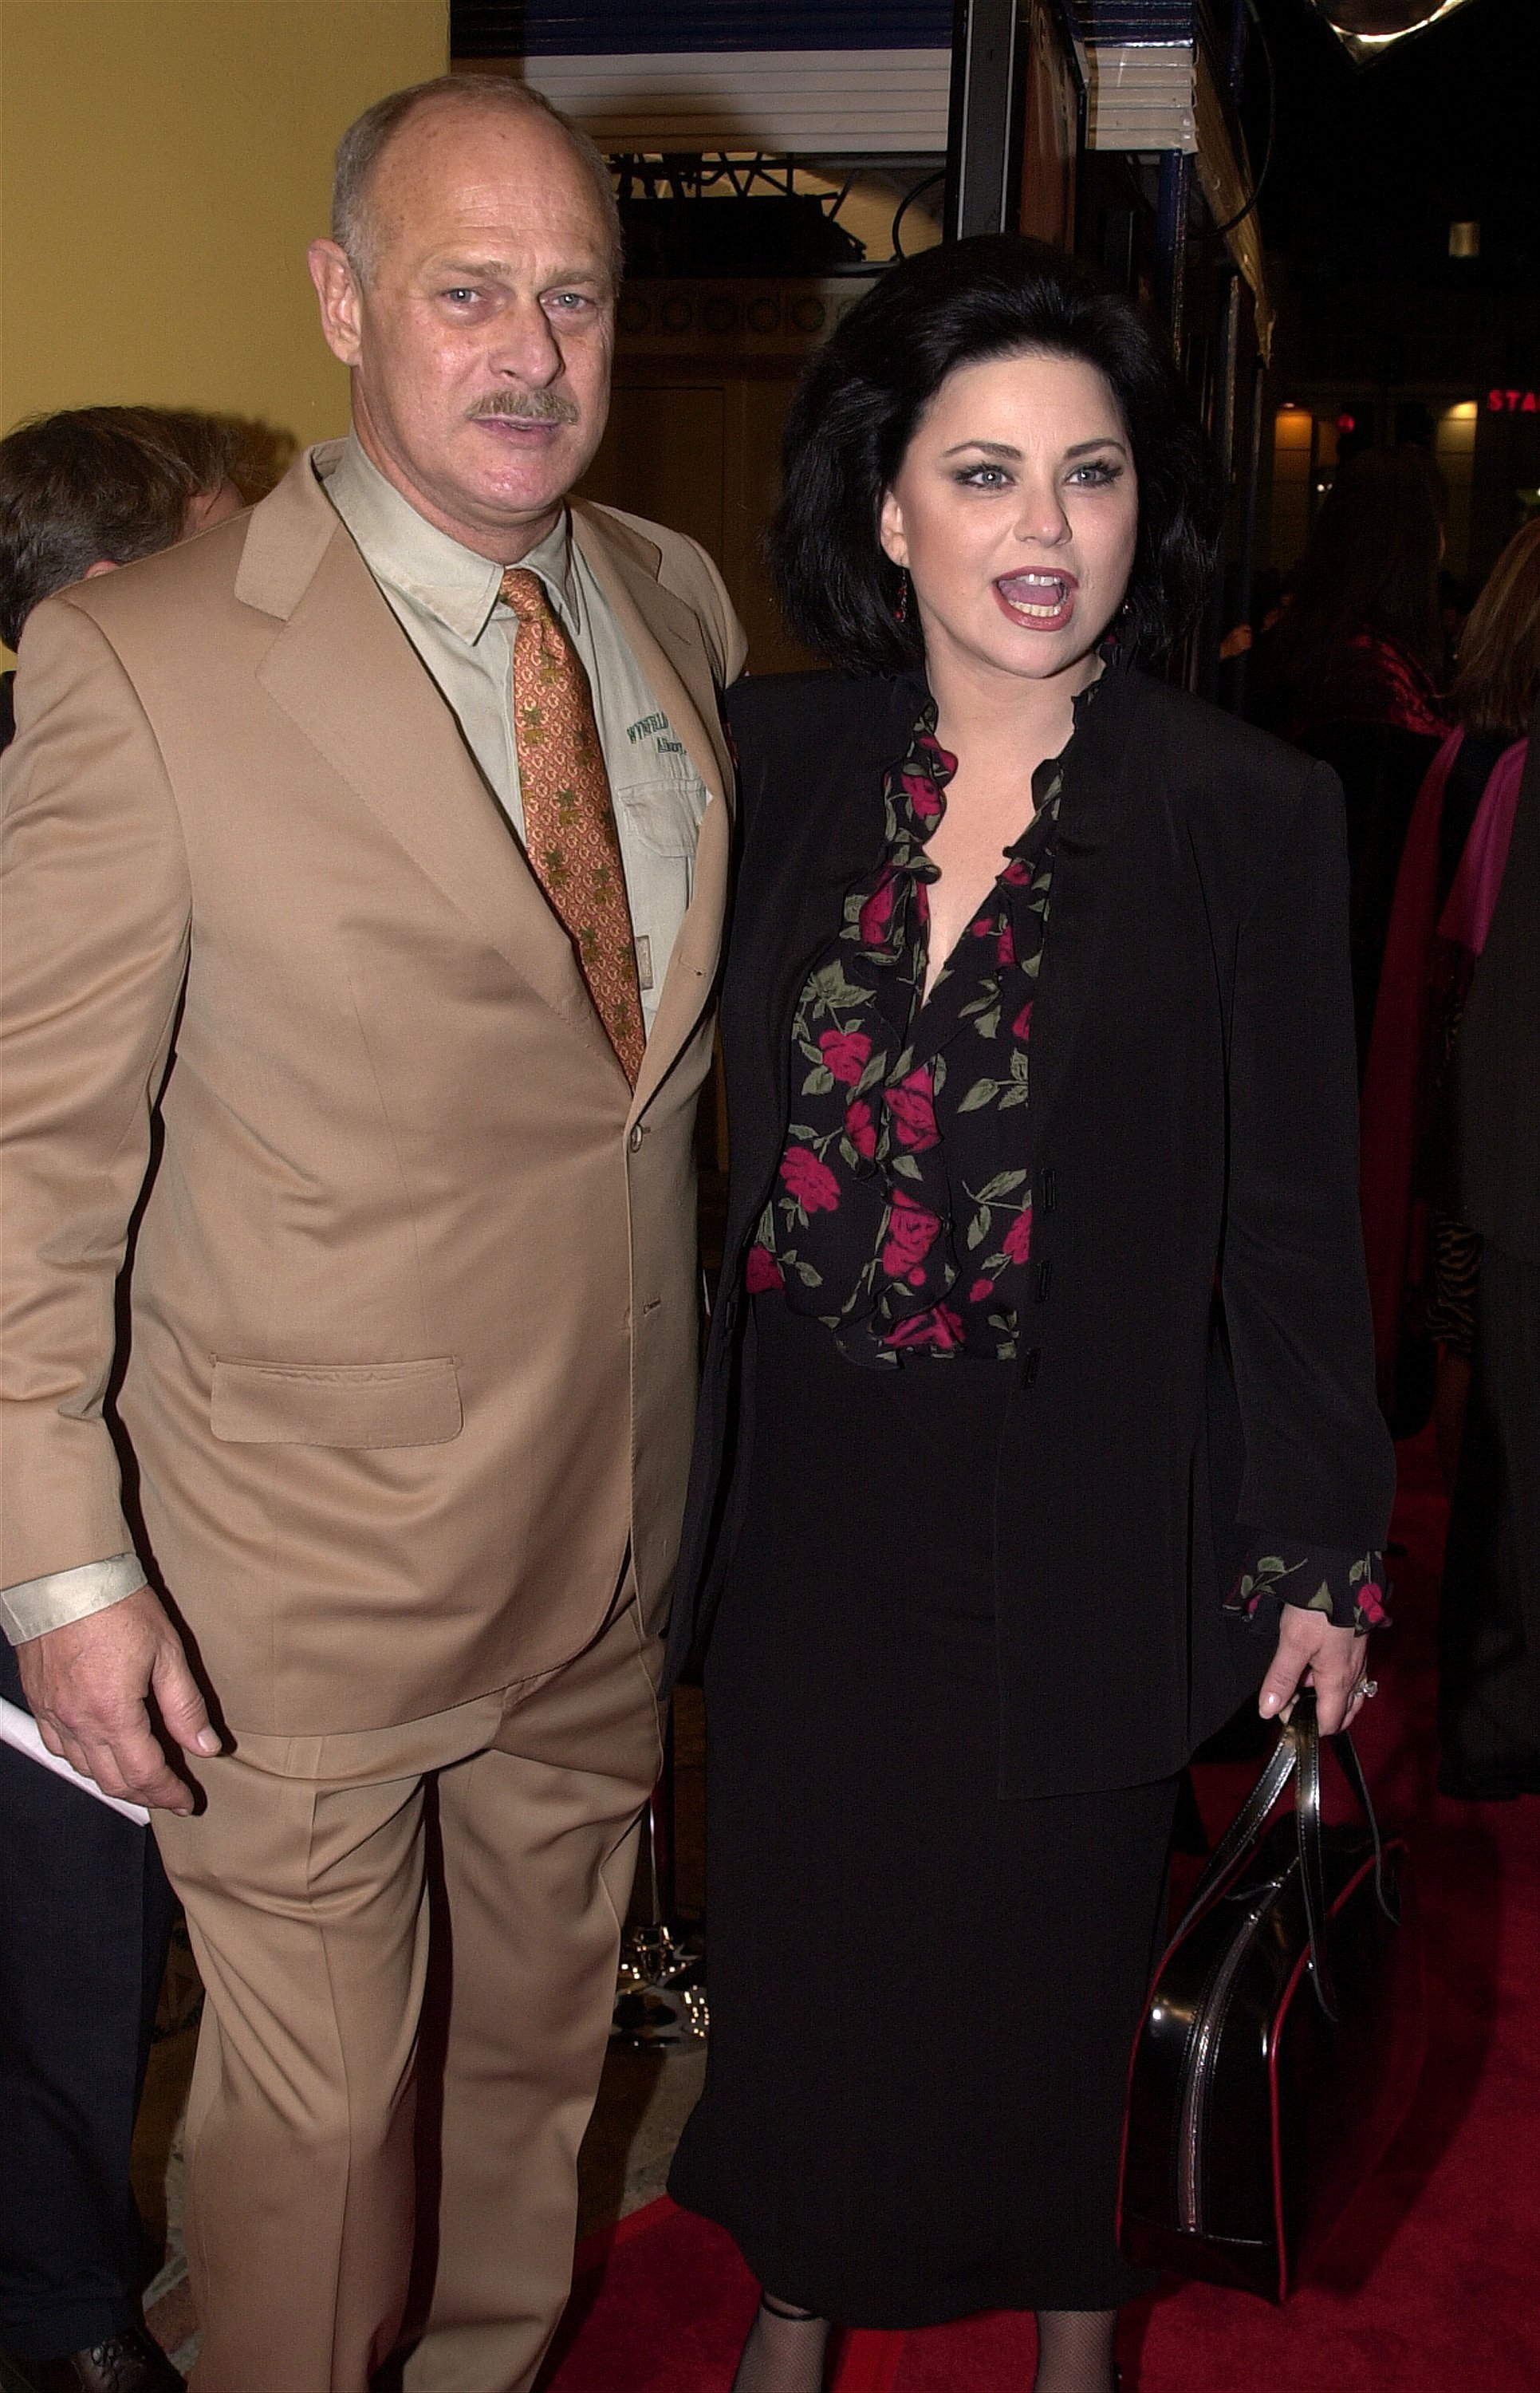 Gerald McRaney and Delta Burke at the premiere of the film "What Women Want" on December 13, 2000, in Los Angeles, California | Source: Getty Images